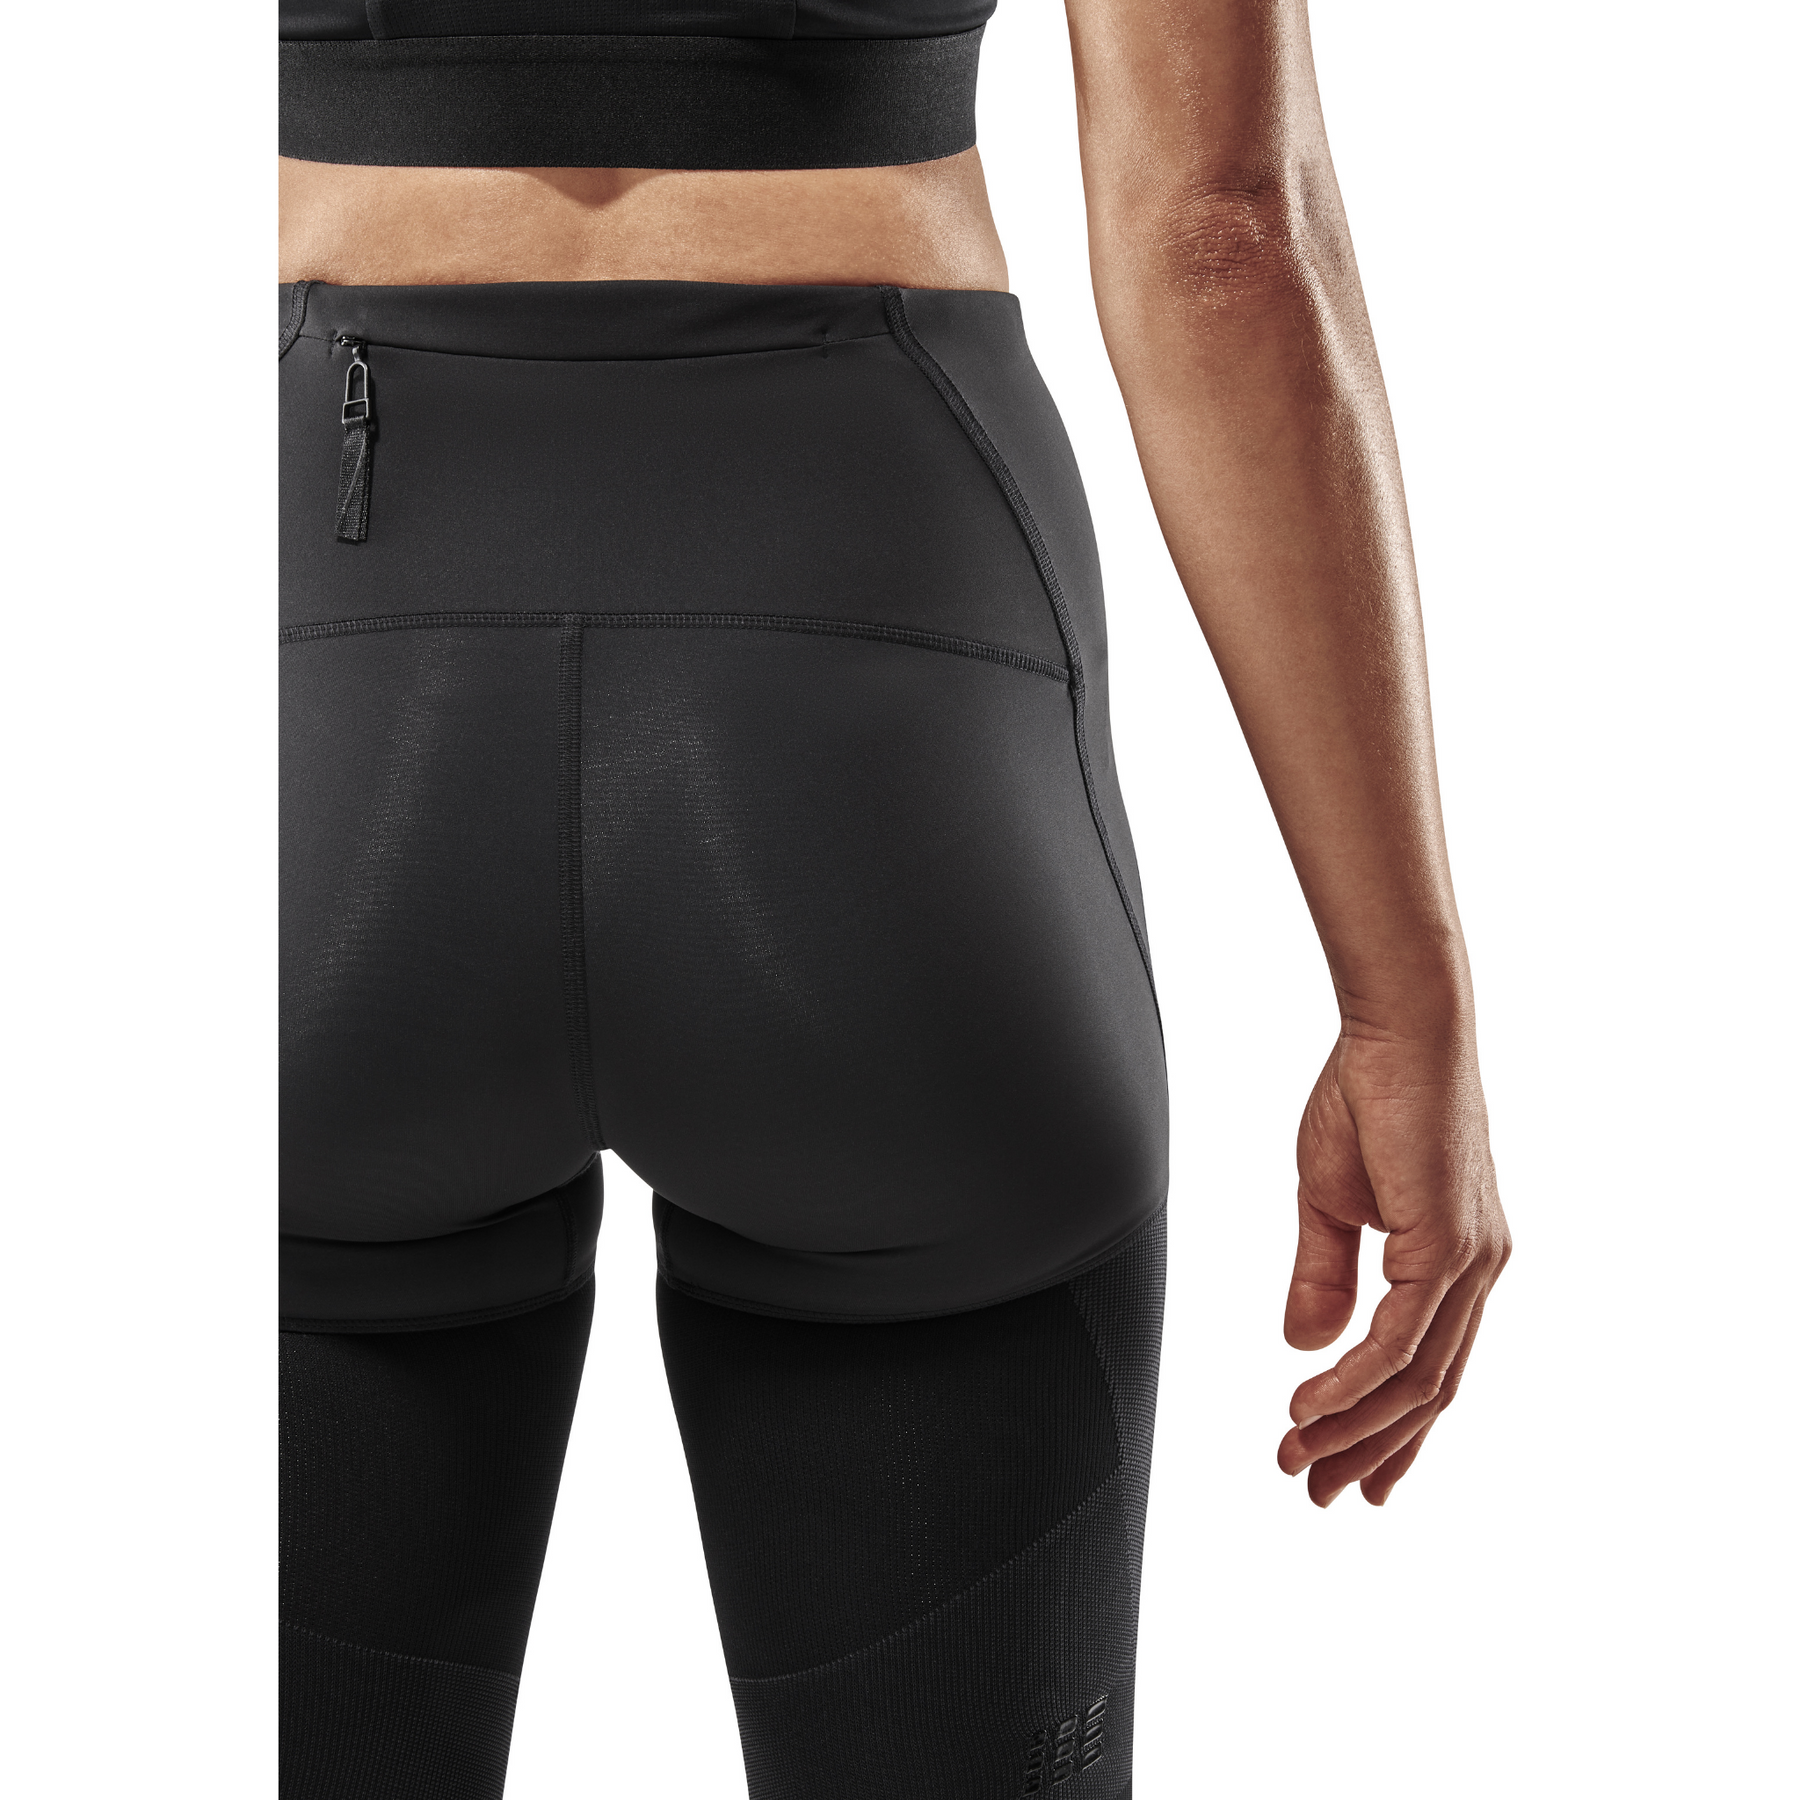 Compression Run Shorts Activating for Women CEP CEP Sportswear | – Compression 4.0